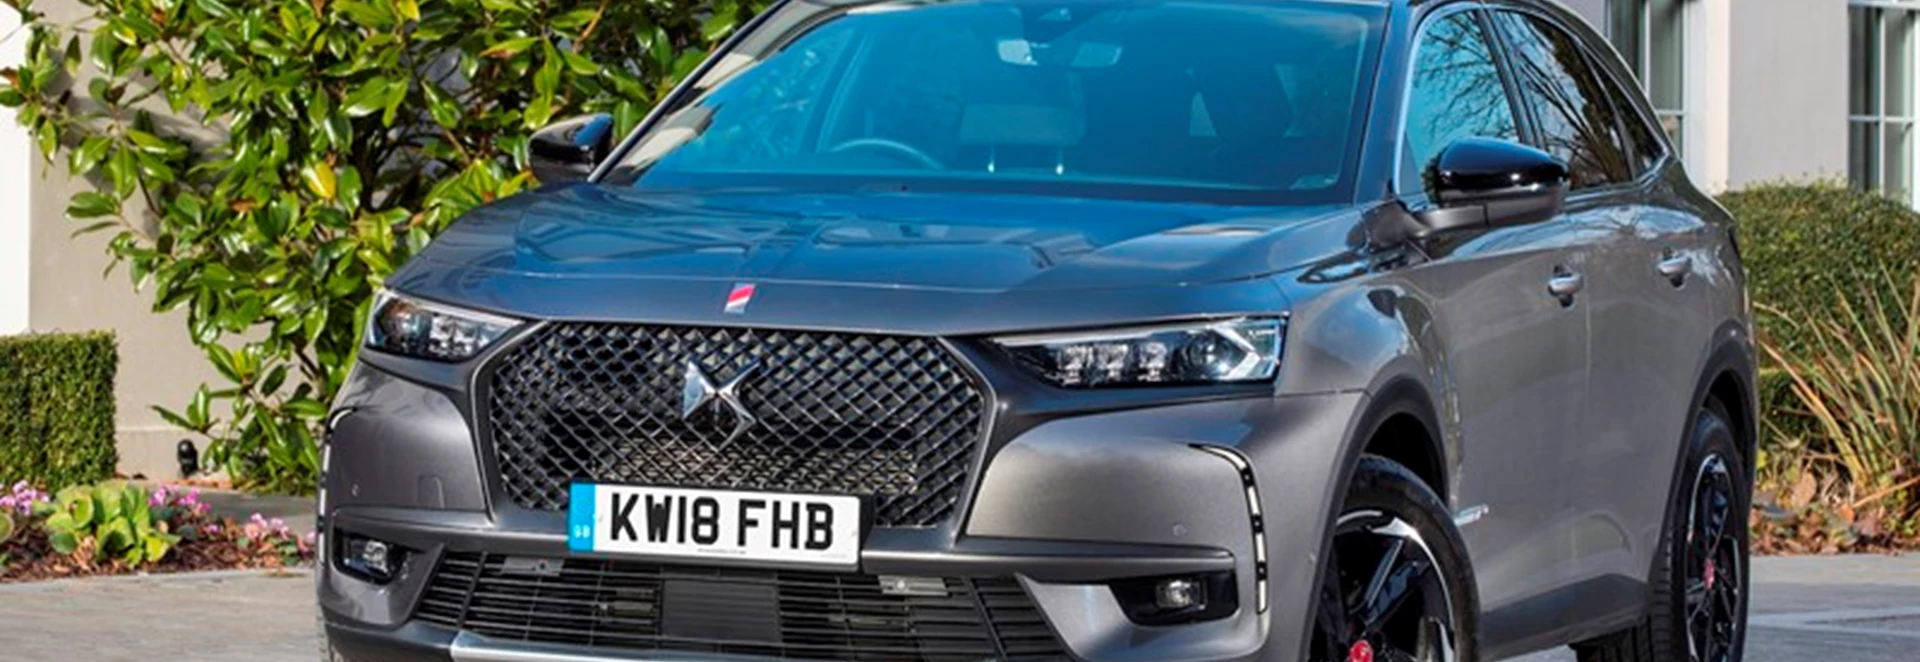 18 plate cars: Here’s the top 10 new reg cars